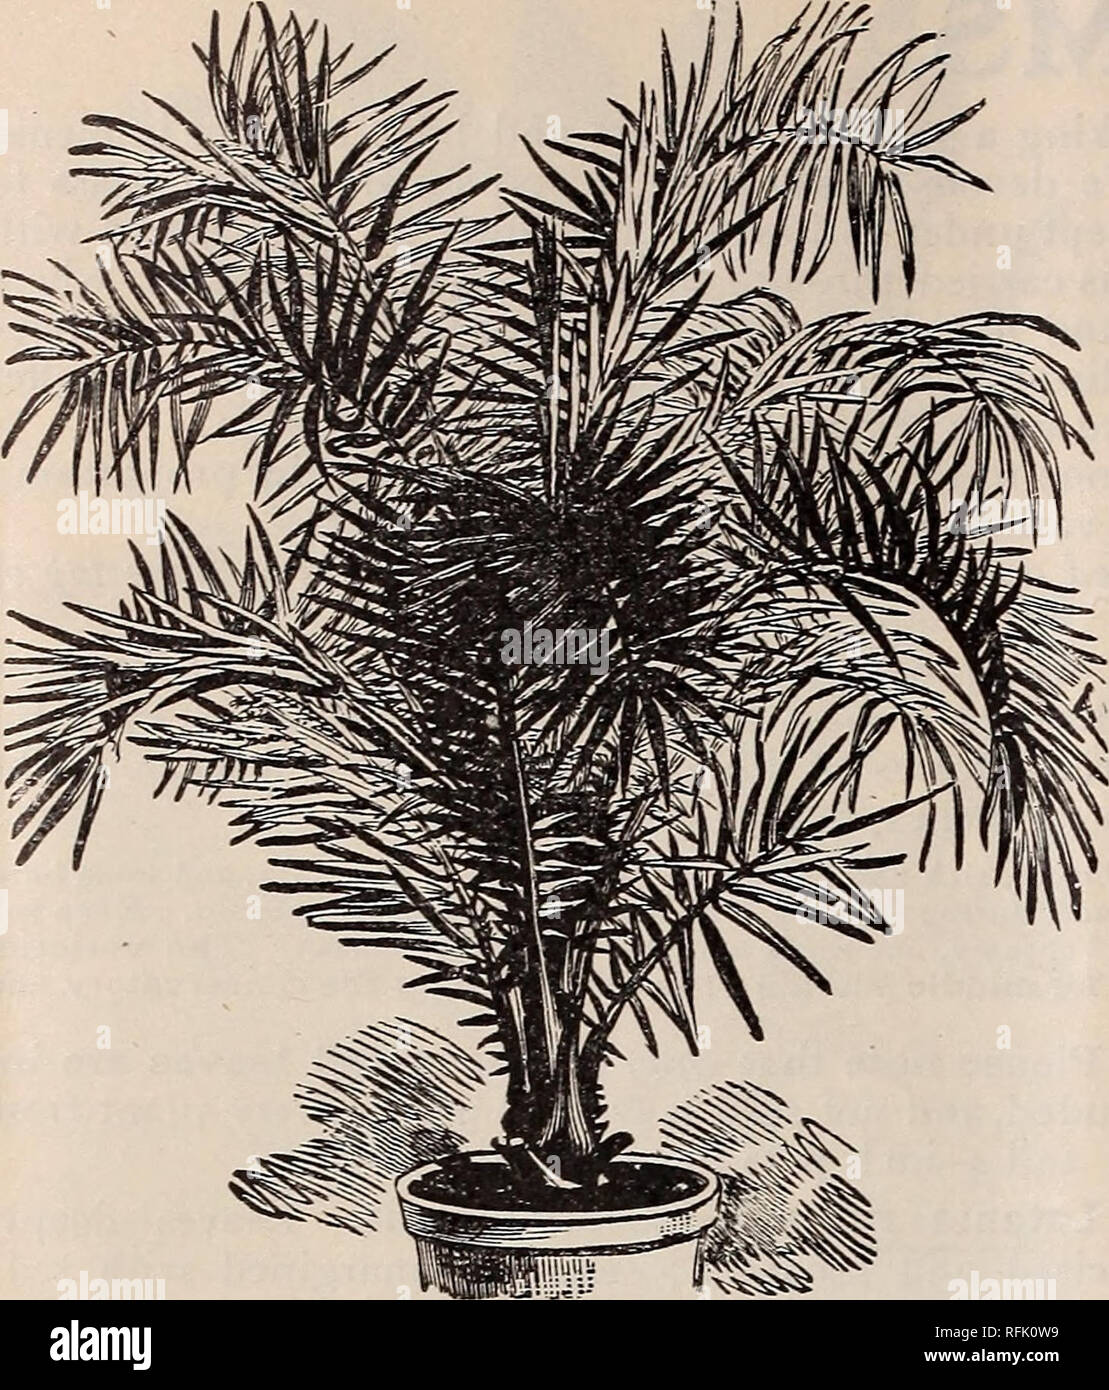 . Fruitland Nurseries 1900. Nurseries (Horticulture) Georgia Augusta Catalogs; Fruit trees Seedlings Catalogs; Trees Seedlings Catalogs; Plants, Ornamental Catalogs. 46 P. J. Berckmans Company's Tree and Plant Catalogue. Phoenix pumila Caryota urens (Fish-Tail Palm). Leaves with broad pinnules, the ultimate divisions having the shape of the tail of a fish. 50 cts. and $1. *Cocos Alphonsii. Known in South Florida as the Belair Palm. A tall-growing tree ; leaves bright green. 50 cts. Cocos Campestris. Leaves spreading, recurved, 3 to 4 feet long. Segments narrow, lanceolate. 18 to 24 inches, 50  Stock Photo